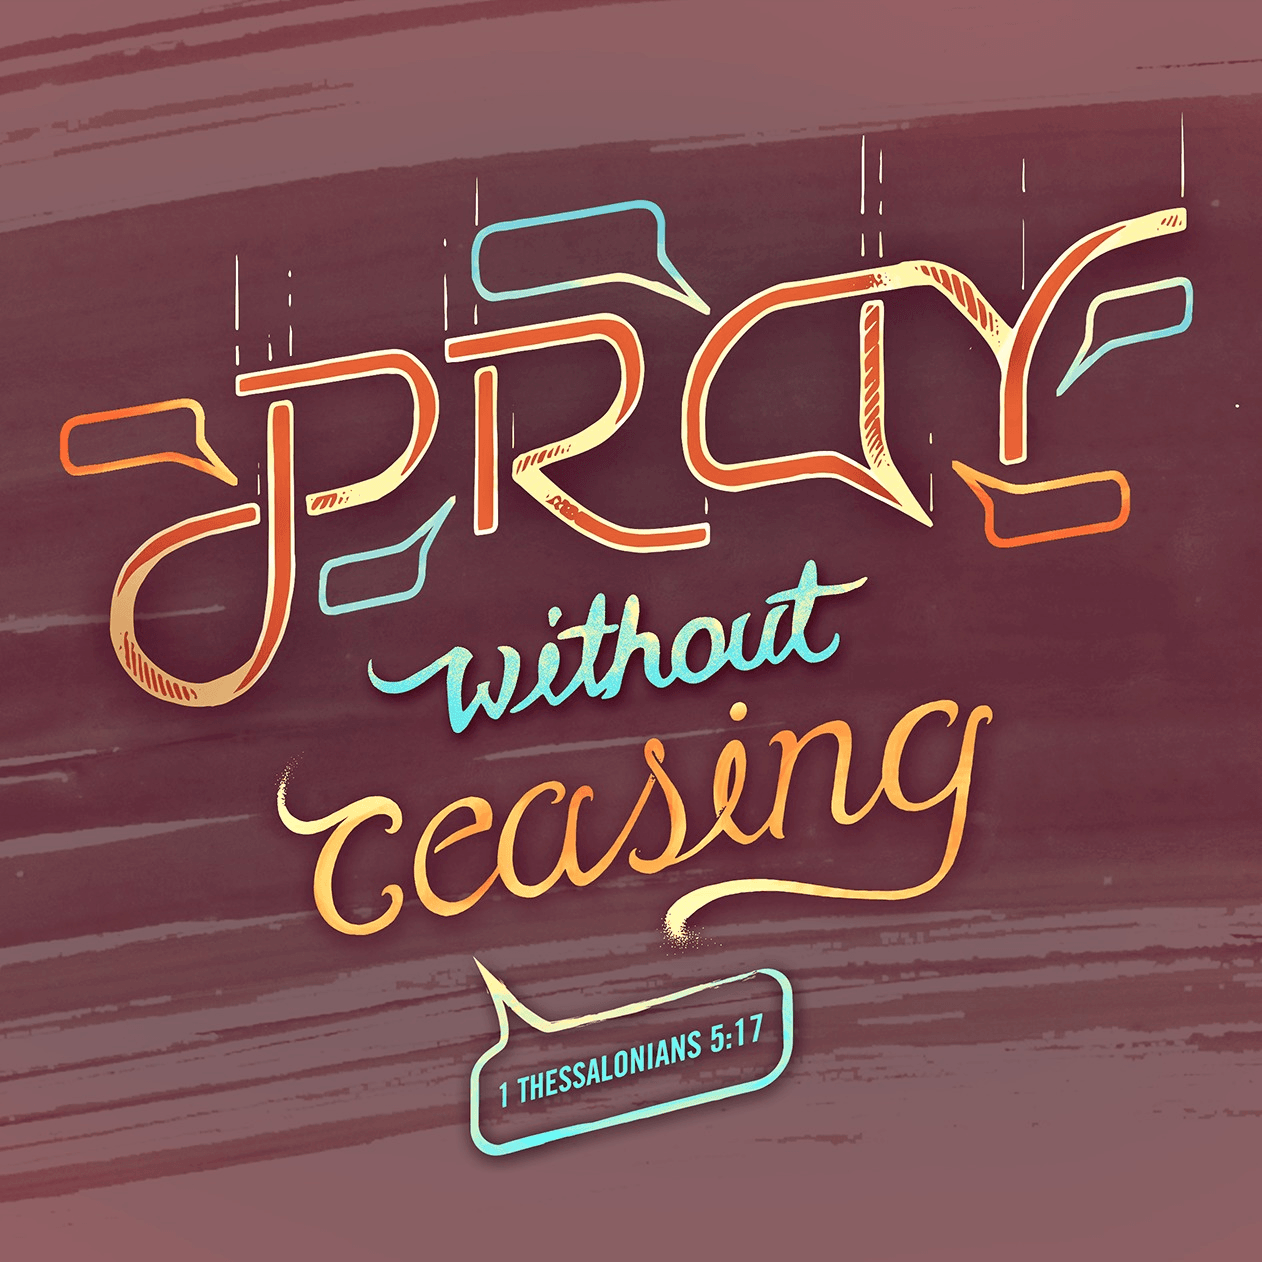 Pray without ceasing. 1 Thessalonians 5:17